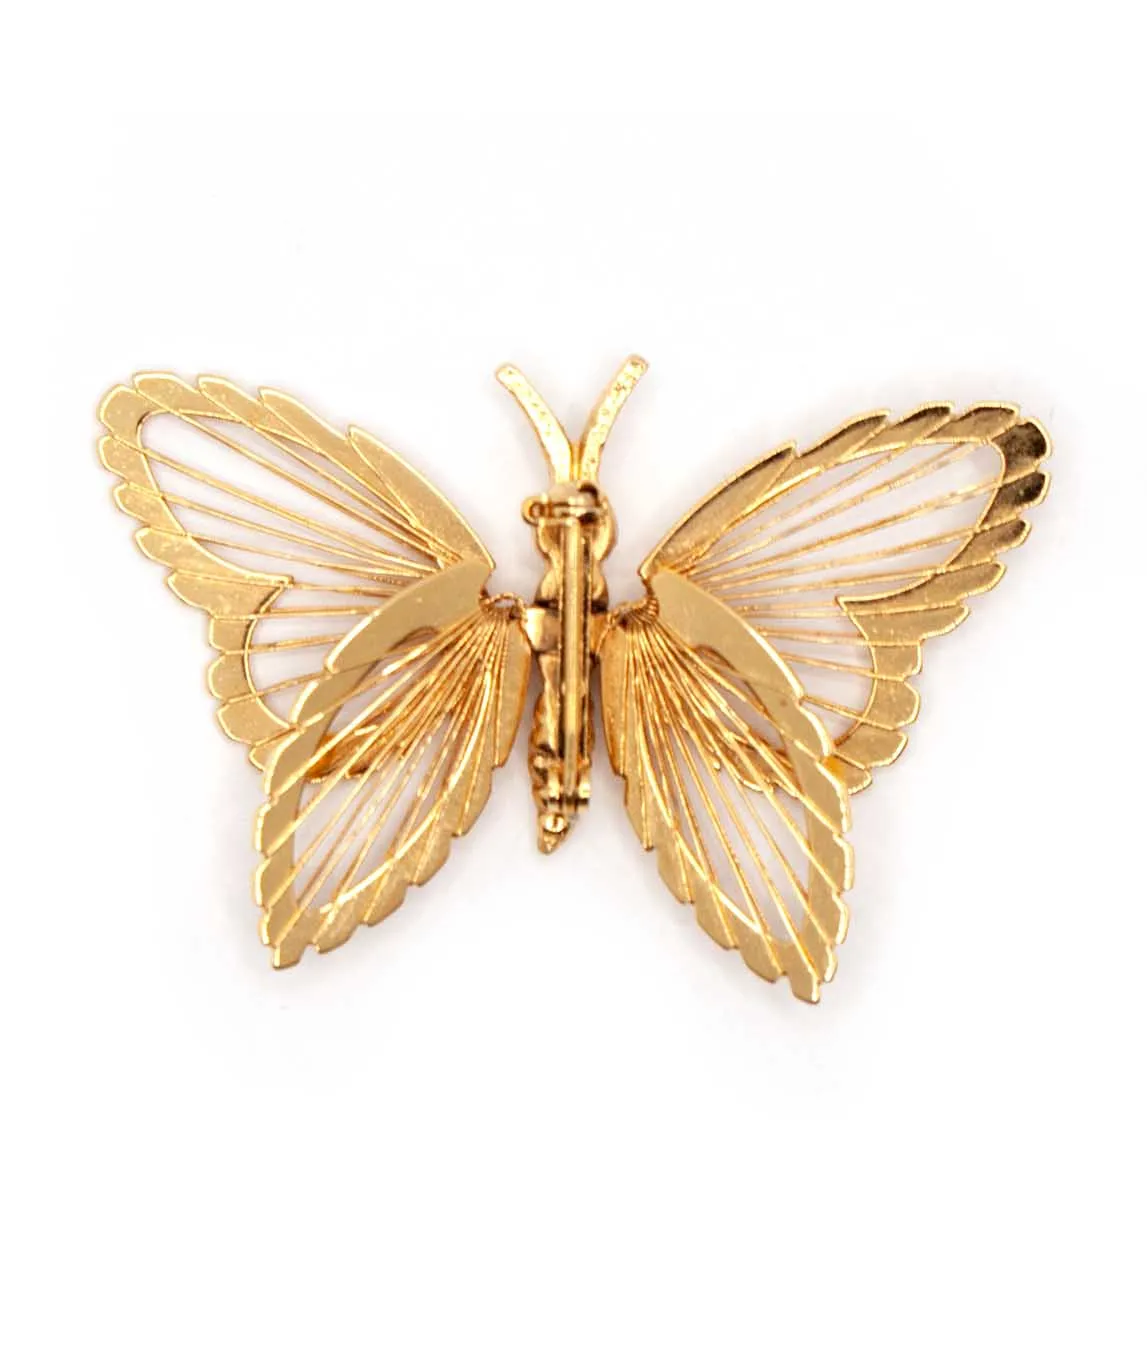 Back of Monet Menagerie butterfly brooch pin gold tone with wire wings